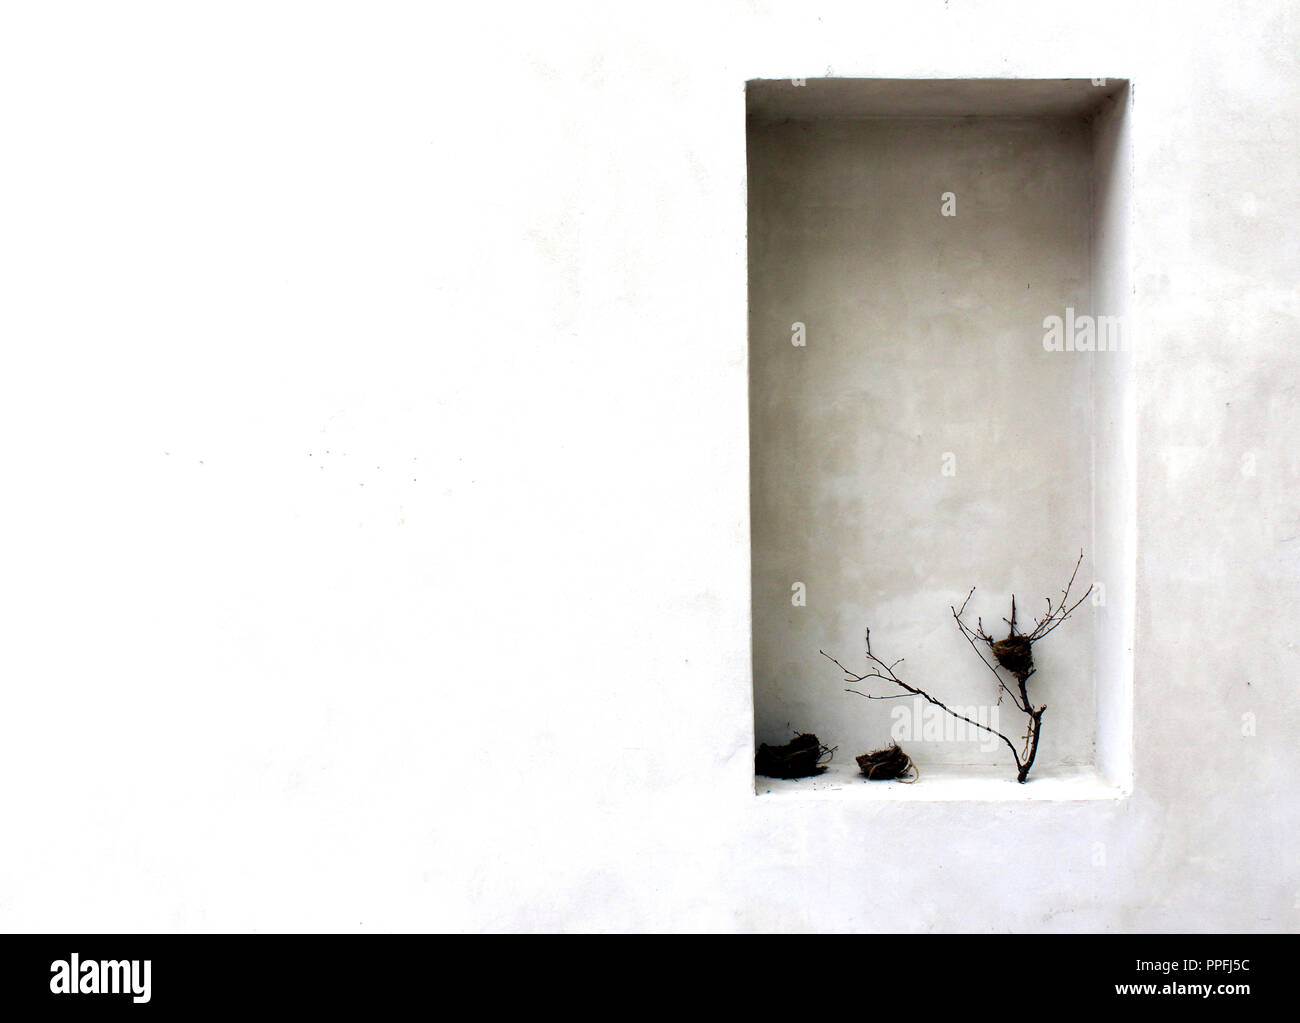 Walled concrete window with seen in detail with still life objects Stock Photo